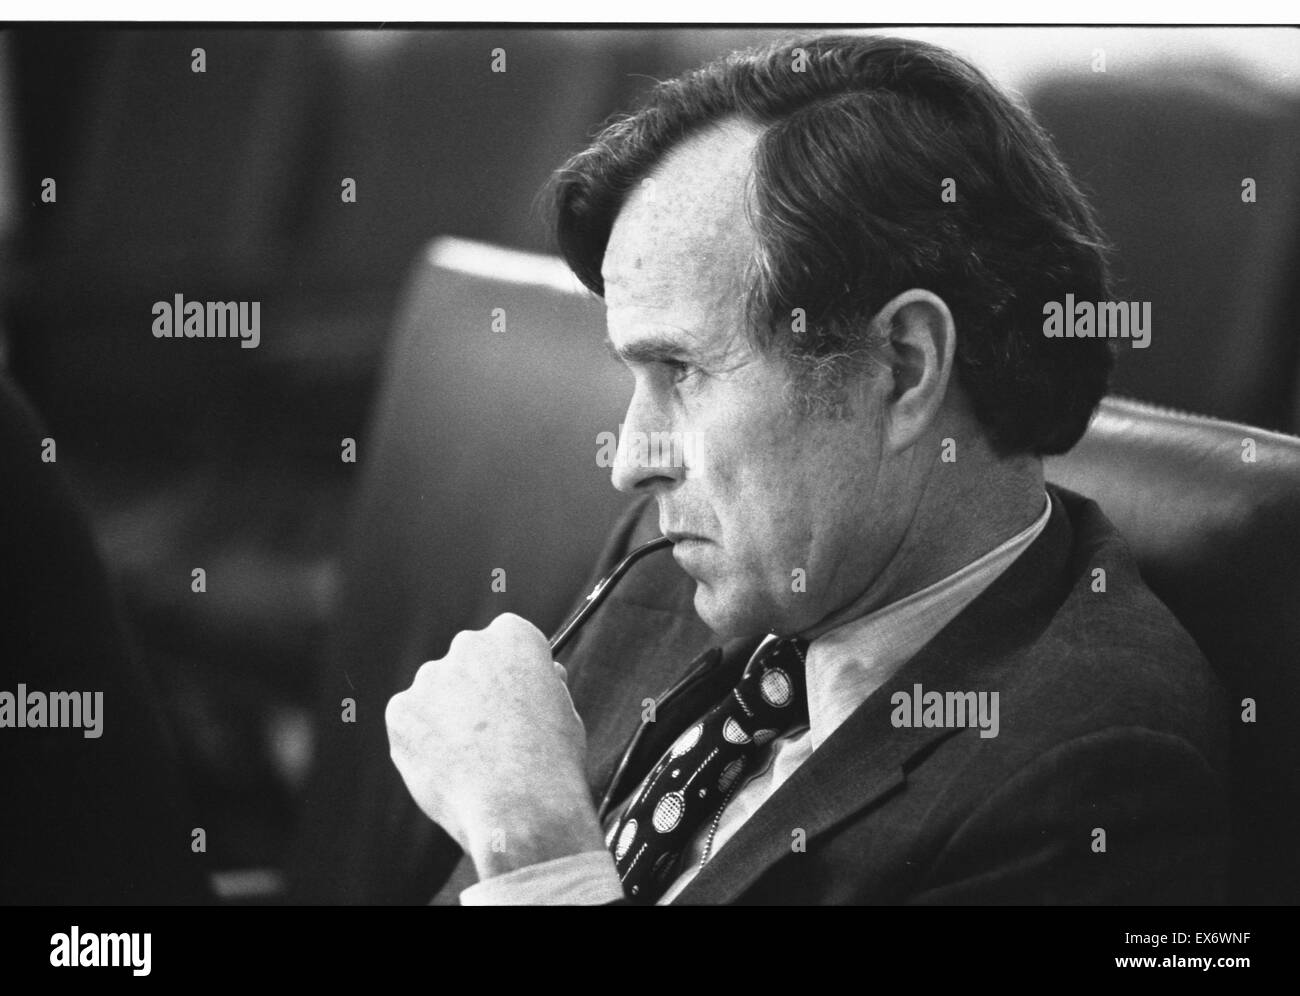 George Herbert Walker Bush (born June 12, 1924) 41st President of the United States (1989–1993). A Republican, he had previously served as Vice President (1981–1989), congressman, ambassador, and Director of Central Intelligence 1976-77 Stock Photo